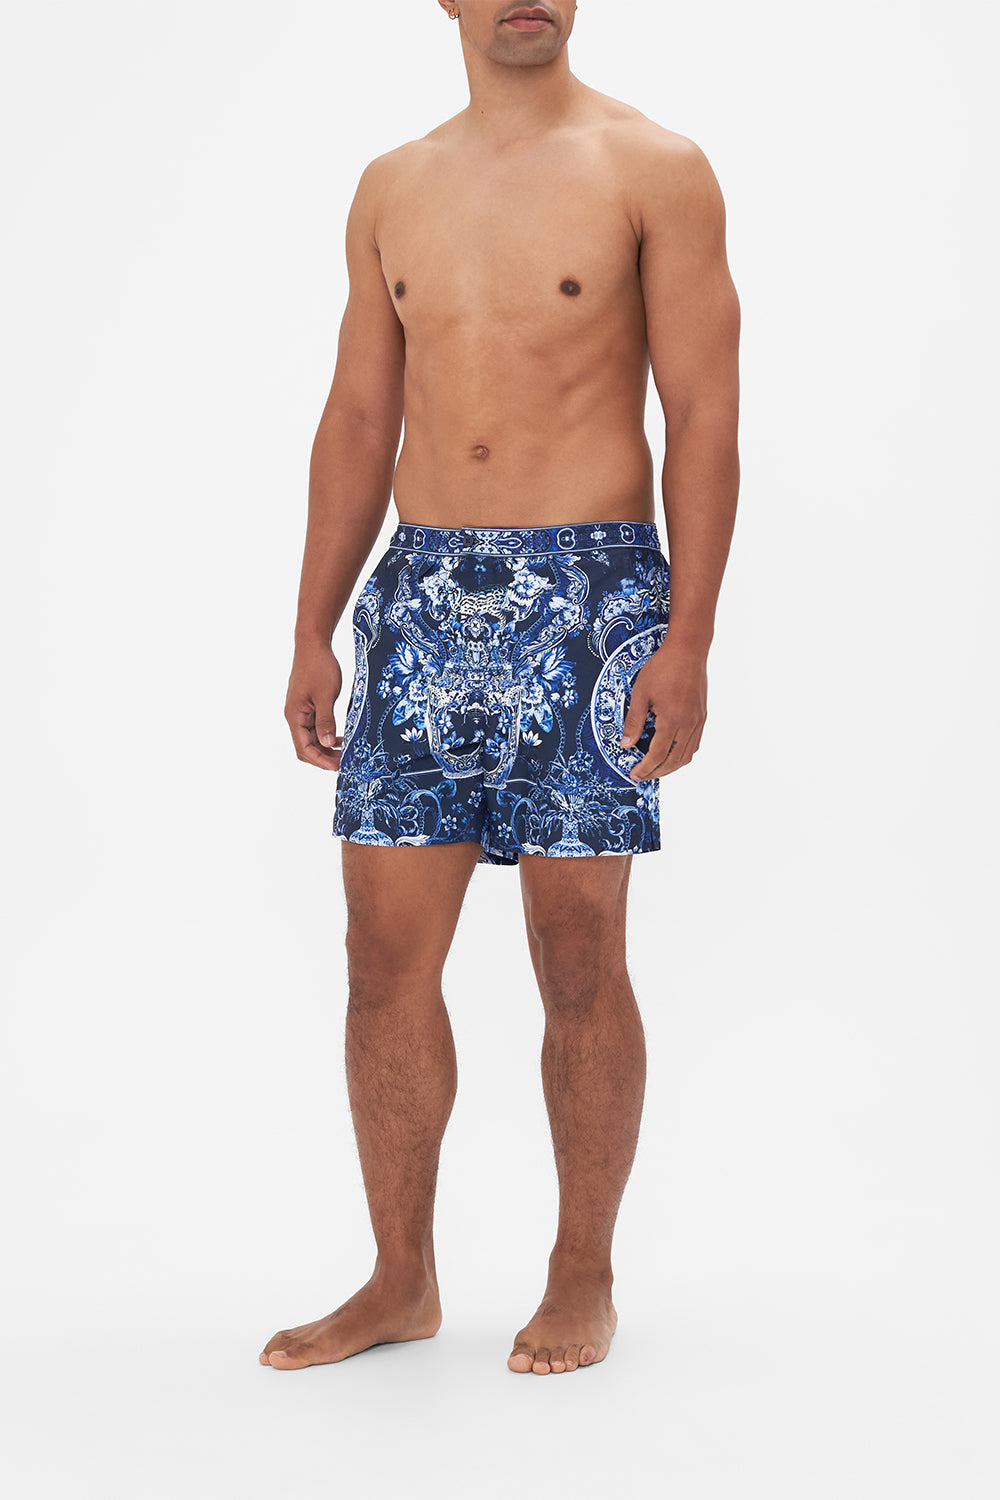 Side view of model wearing Hotel Franks By CAMILLA mens blue swim shorts in Delft Dynasty print